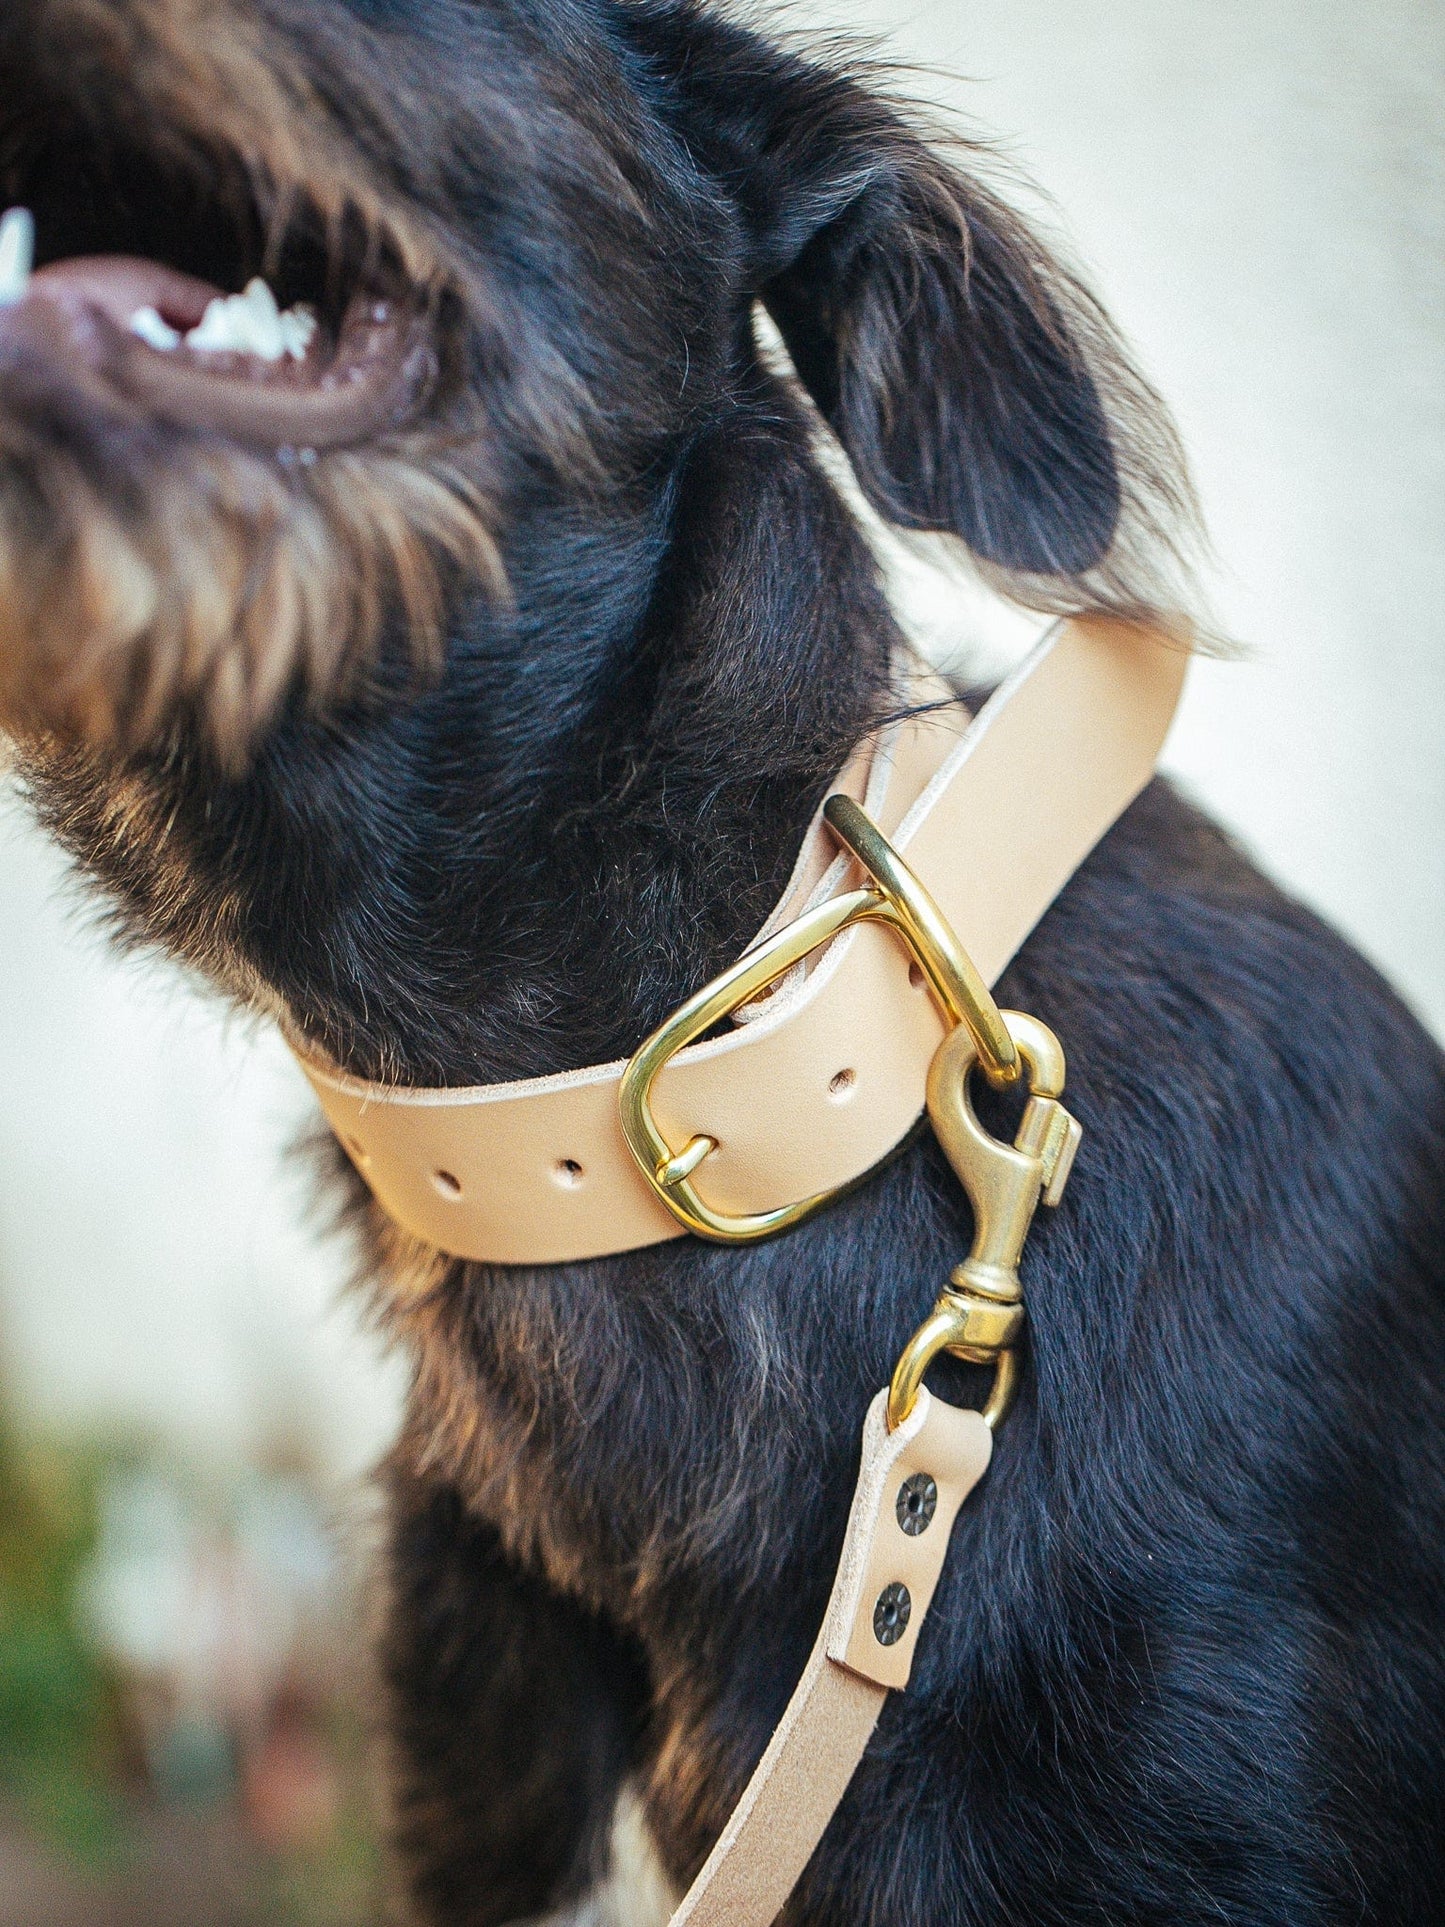 The Real McCaul Leathergoods Pet Collars & Harnesses Dog Collar & Leash Set - 38mm Wide - Natural Australian Made Australian Owned Leather Dog Collar and Lead with Brass Fittings- Australian Made